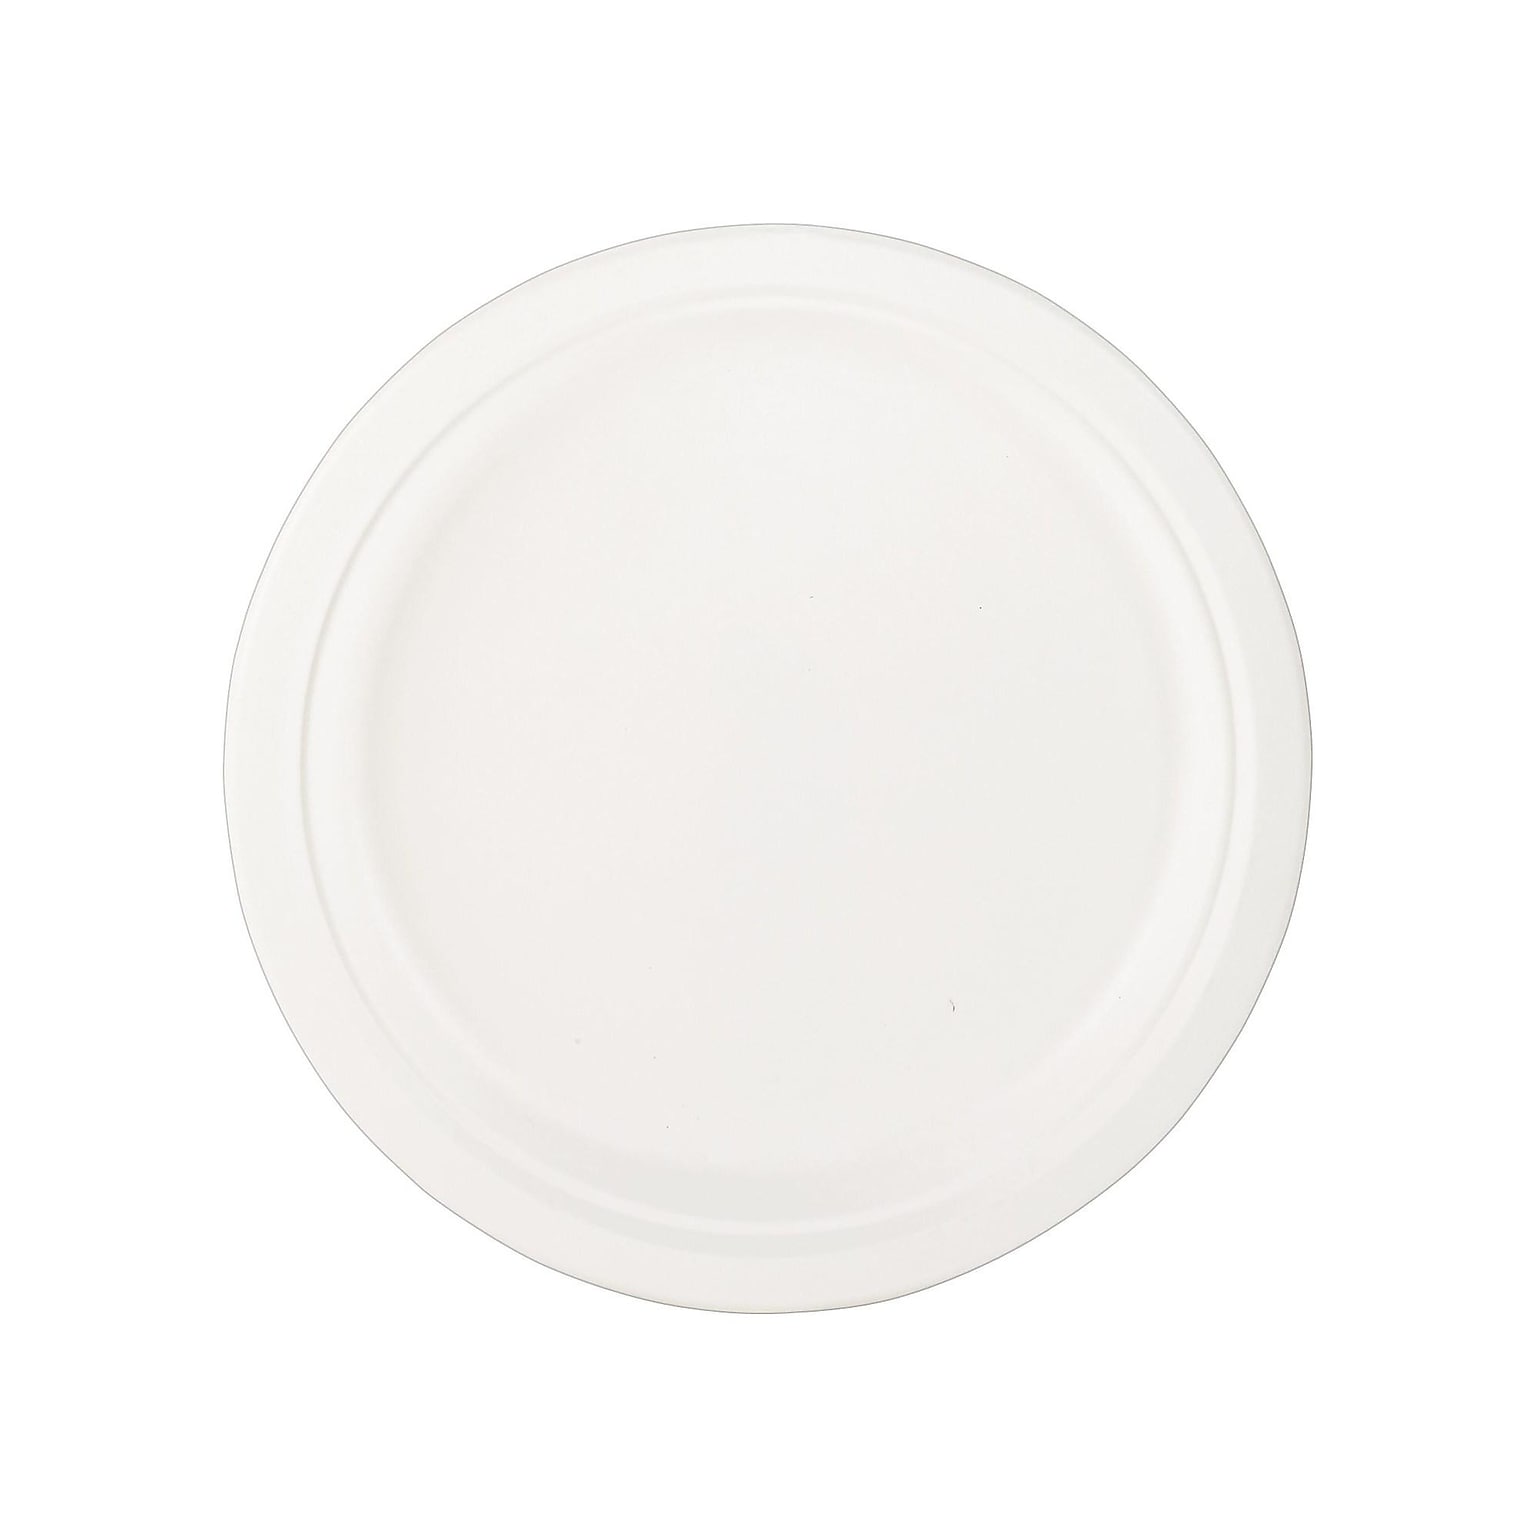 Eco-Products Compostable Round Sugarcane Plate, 10, Natural White, 500/Carton (ECOEPP005)